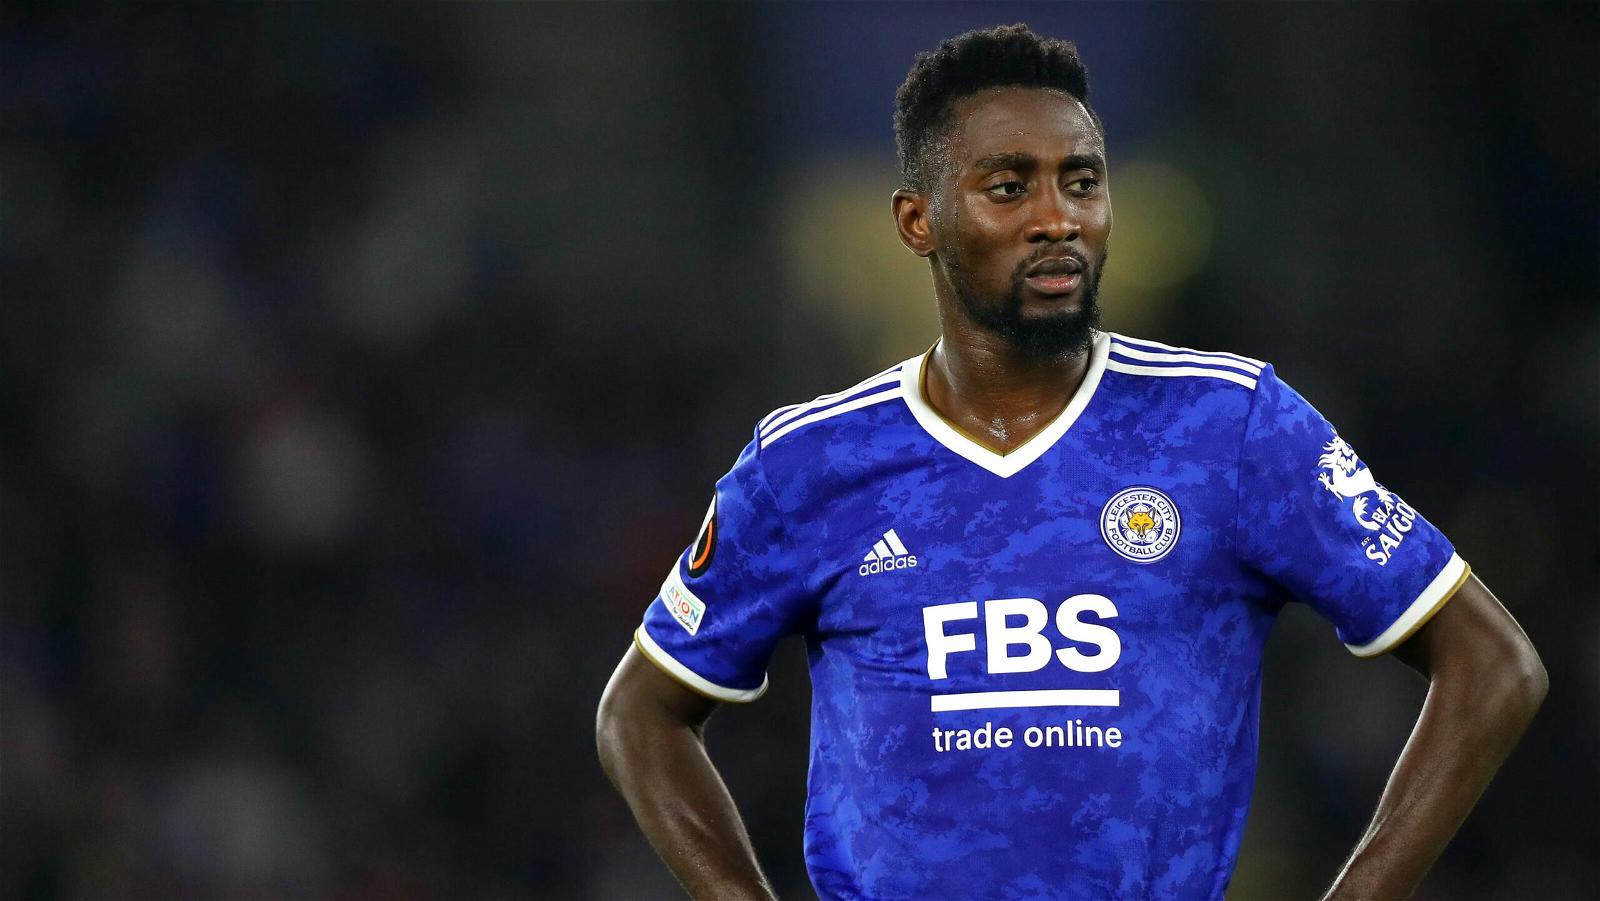 Wilfred Ndidi out for rest of season with knee injury